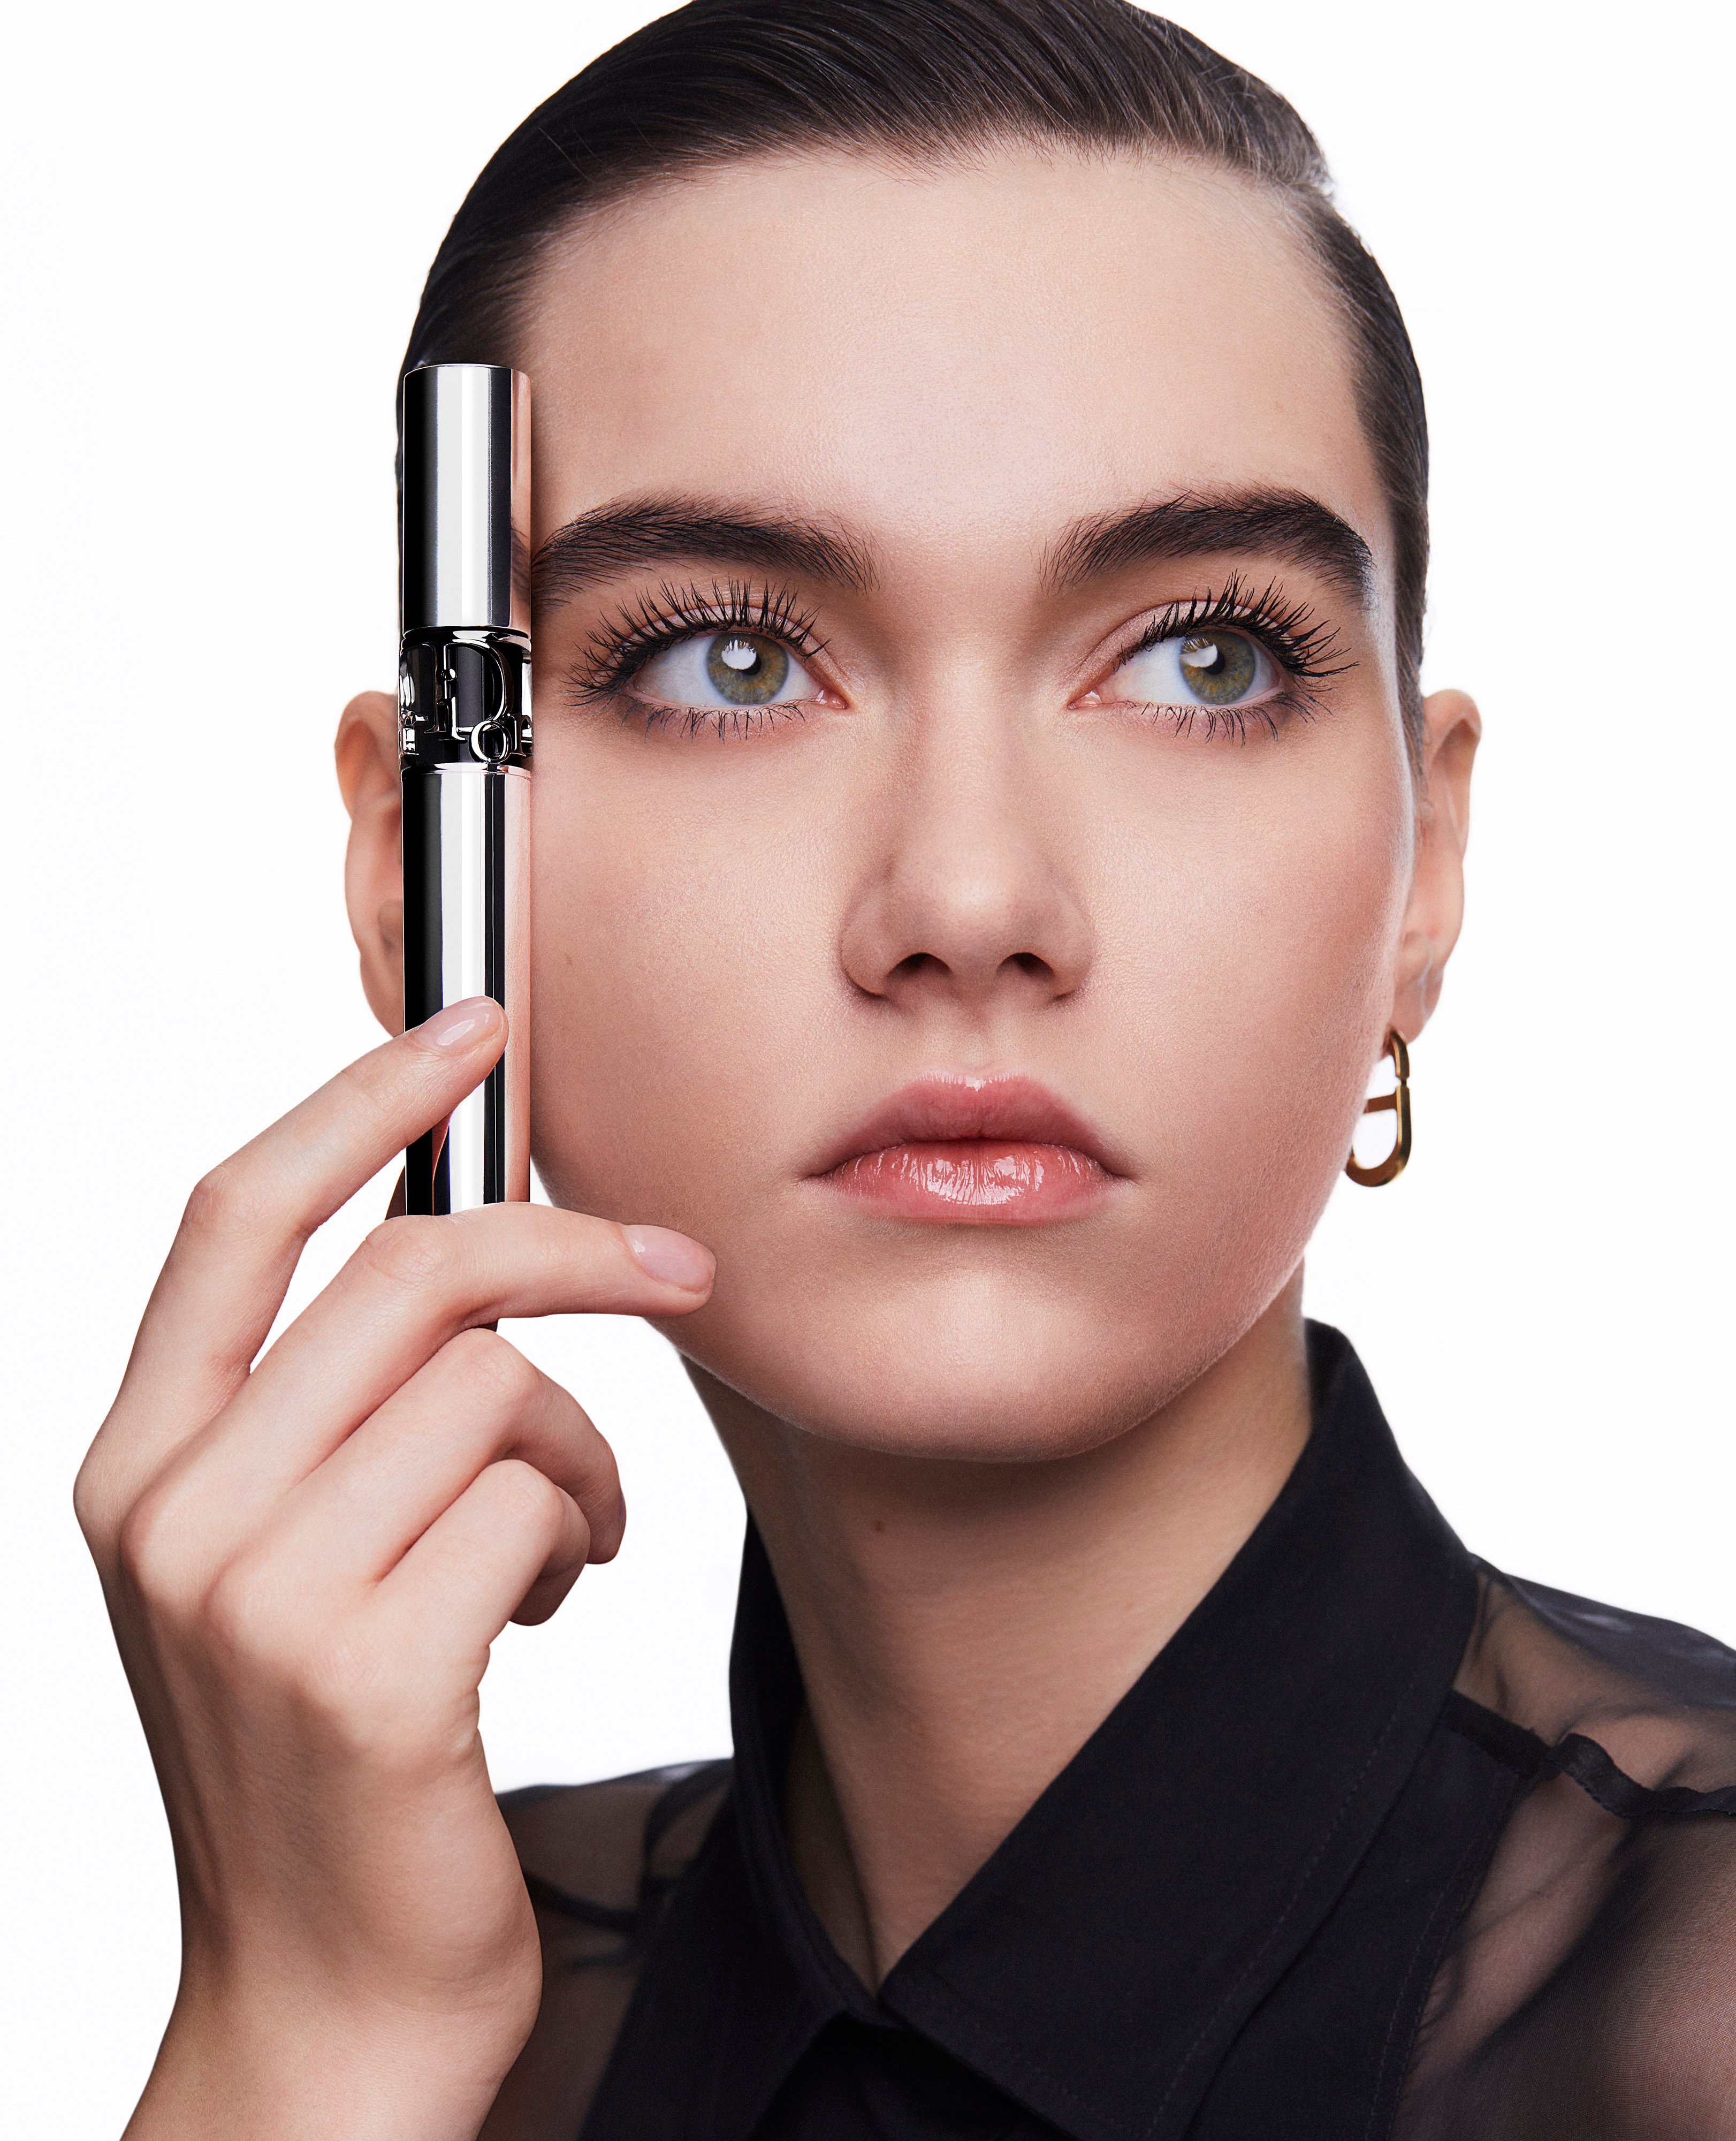 Are luxury mascaras, like Dior’s Diorshow Iconic Overcurl (pictured), really worth splurging on? And what difference does a mascara’s wand make? Photos: Handouts